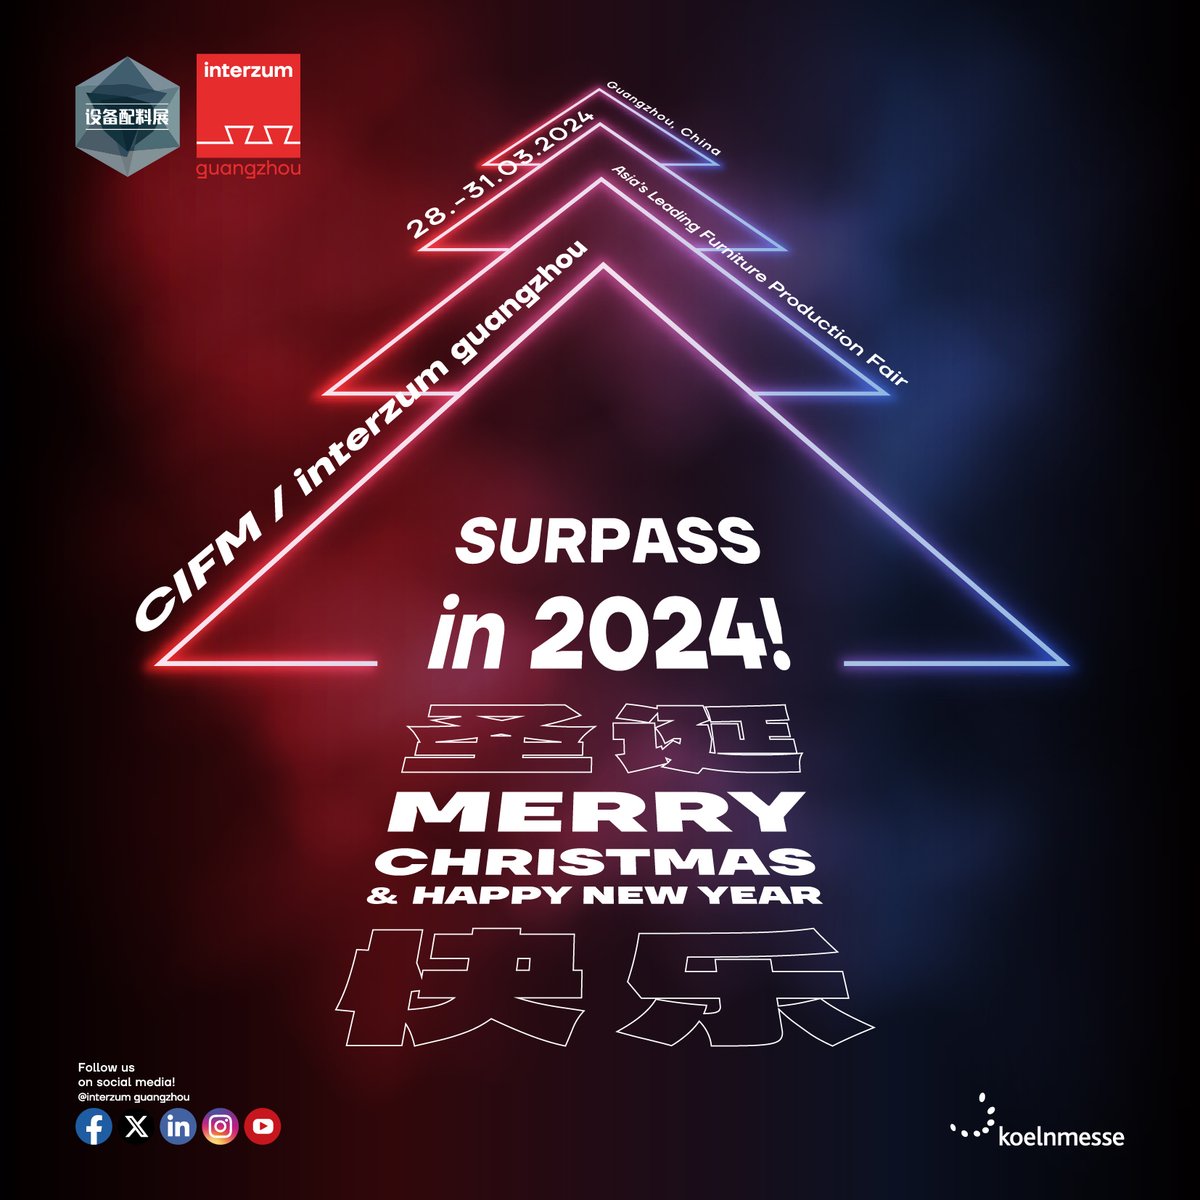 As the festive season is upon us, we would like to express our gratitude to each and every one of you for your continued support and trust in interzum guangzhou. 🎉

🎅We wish you a Merry Christmas🎄!

#interzumguangzhou2024 #interzumguangzhou #Christmas #Xmas